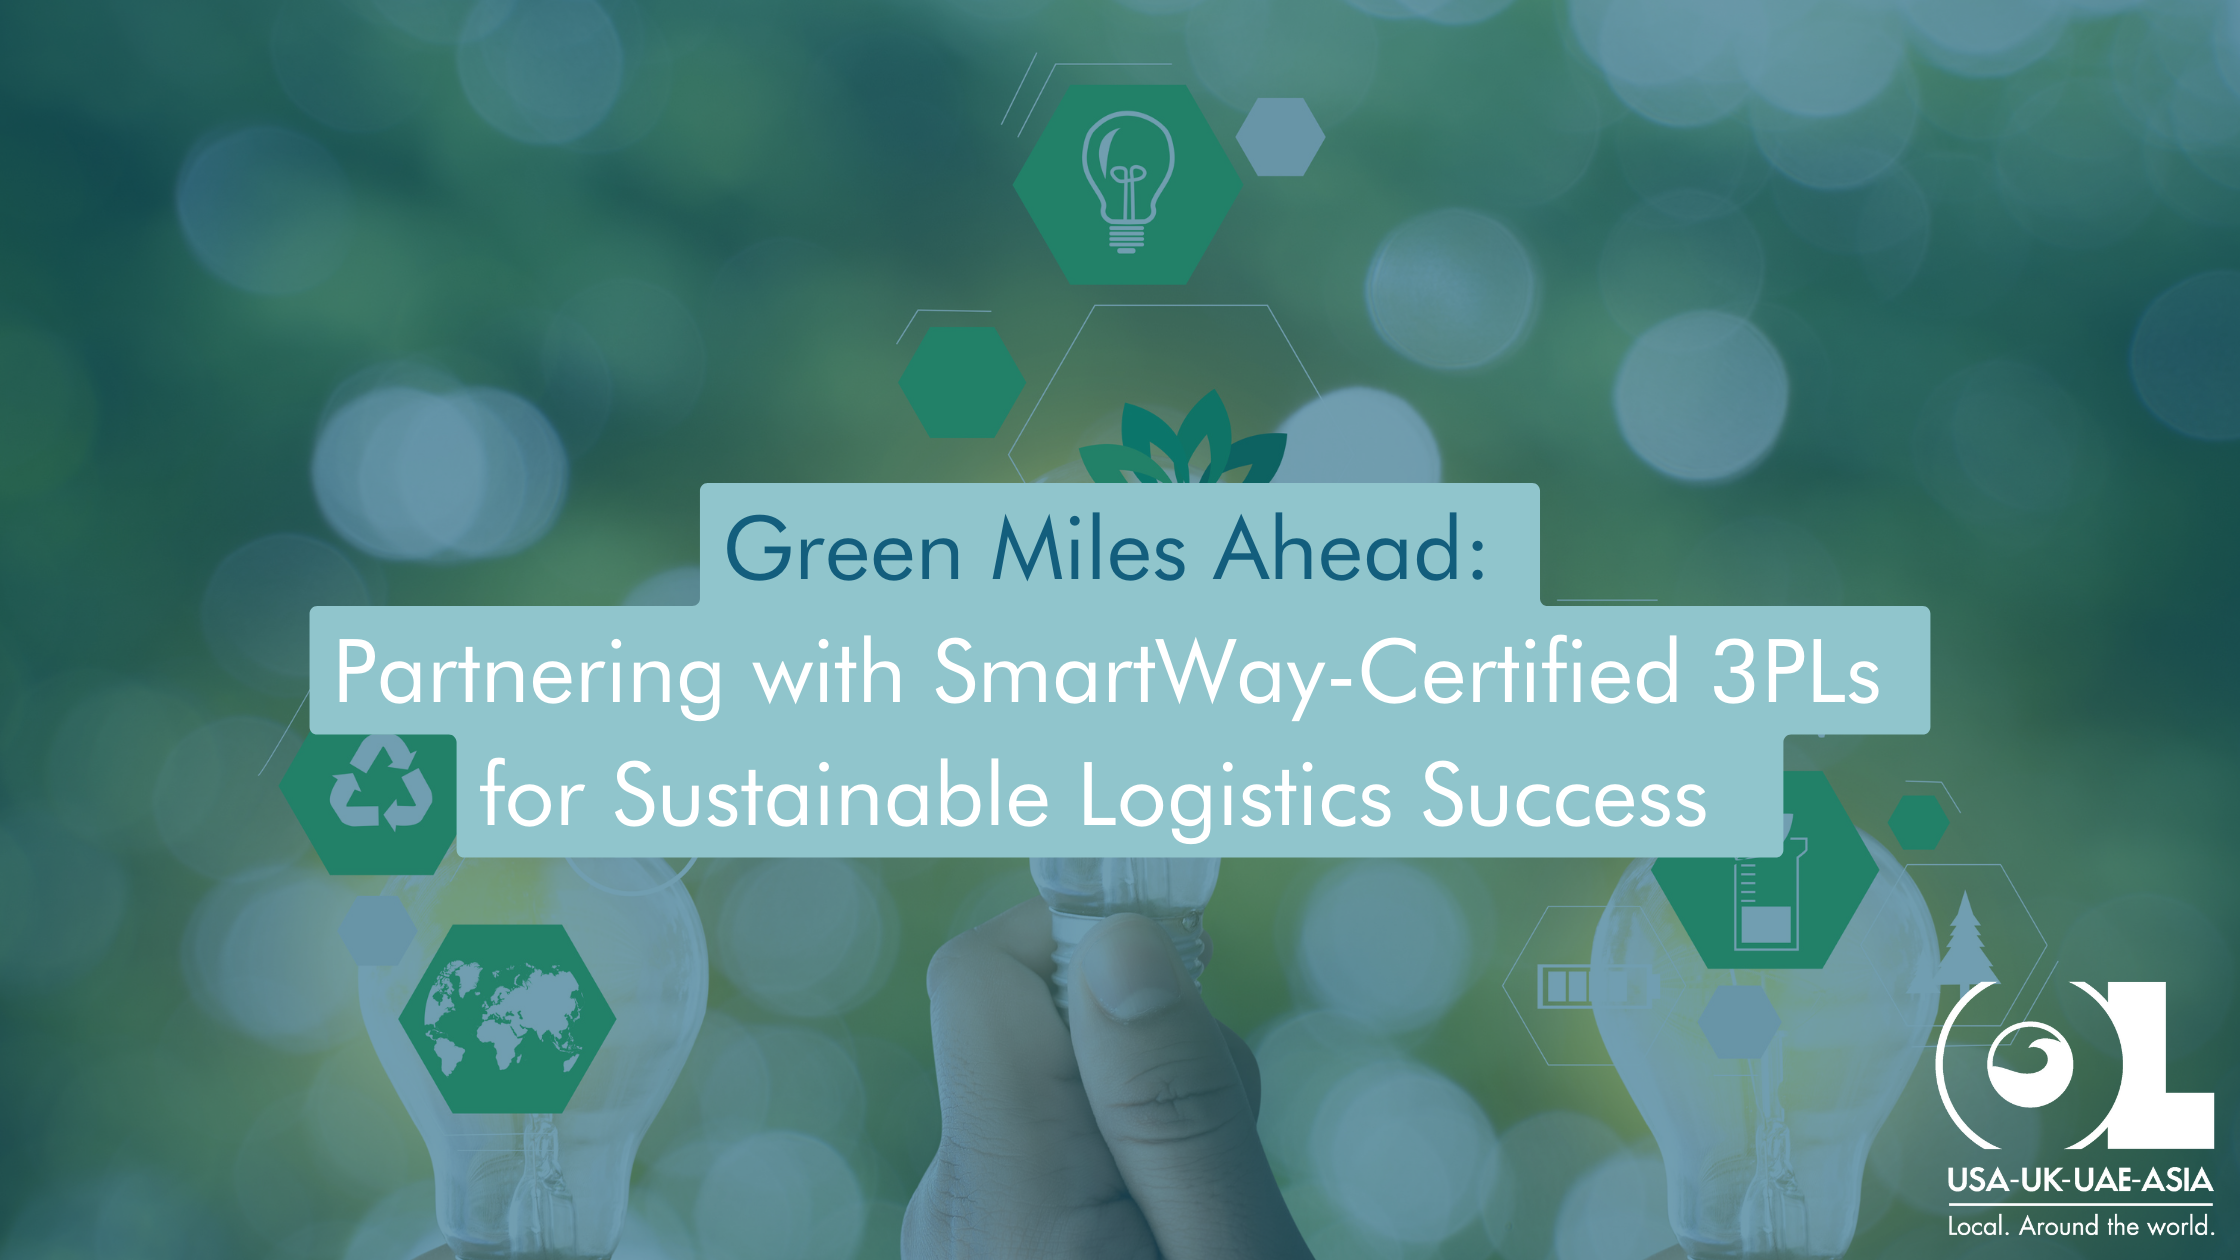 Green-Miles-Ahead-Partnering-with-SmartWay-Certified-3PLs-for-Sustainable-Logistics-Success-OL-USA